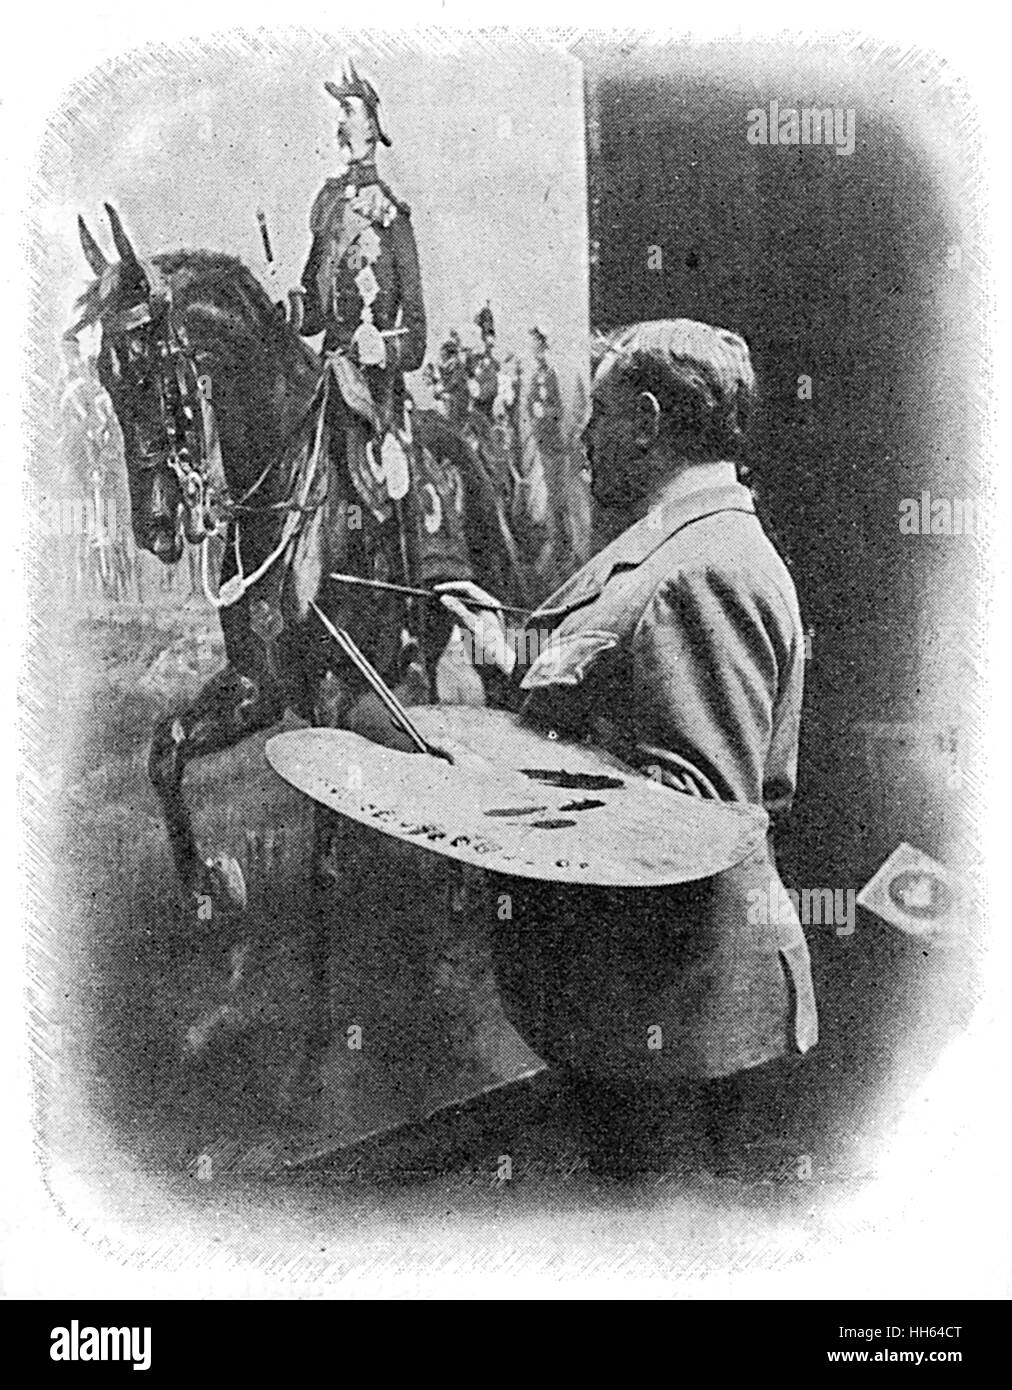 Richard Caton Woodville at work on a painting Stock Photo